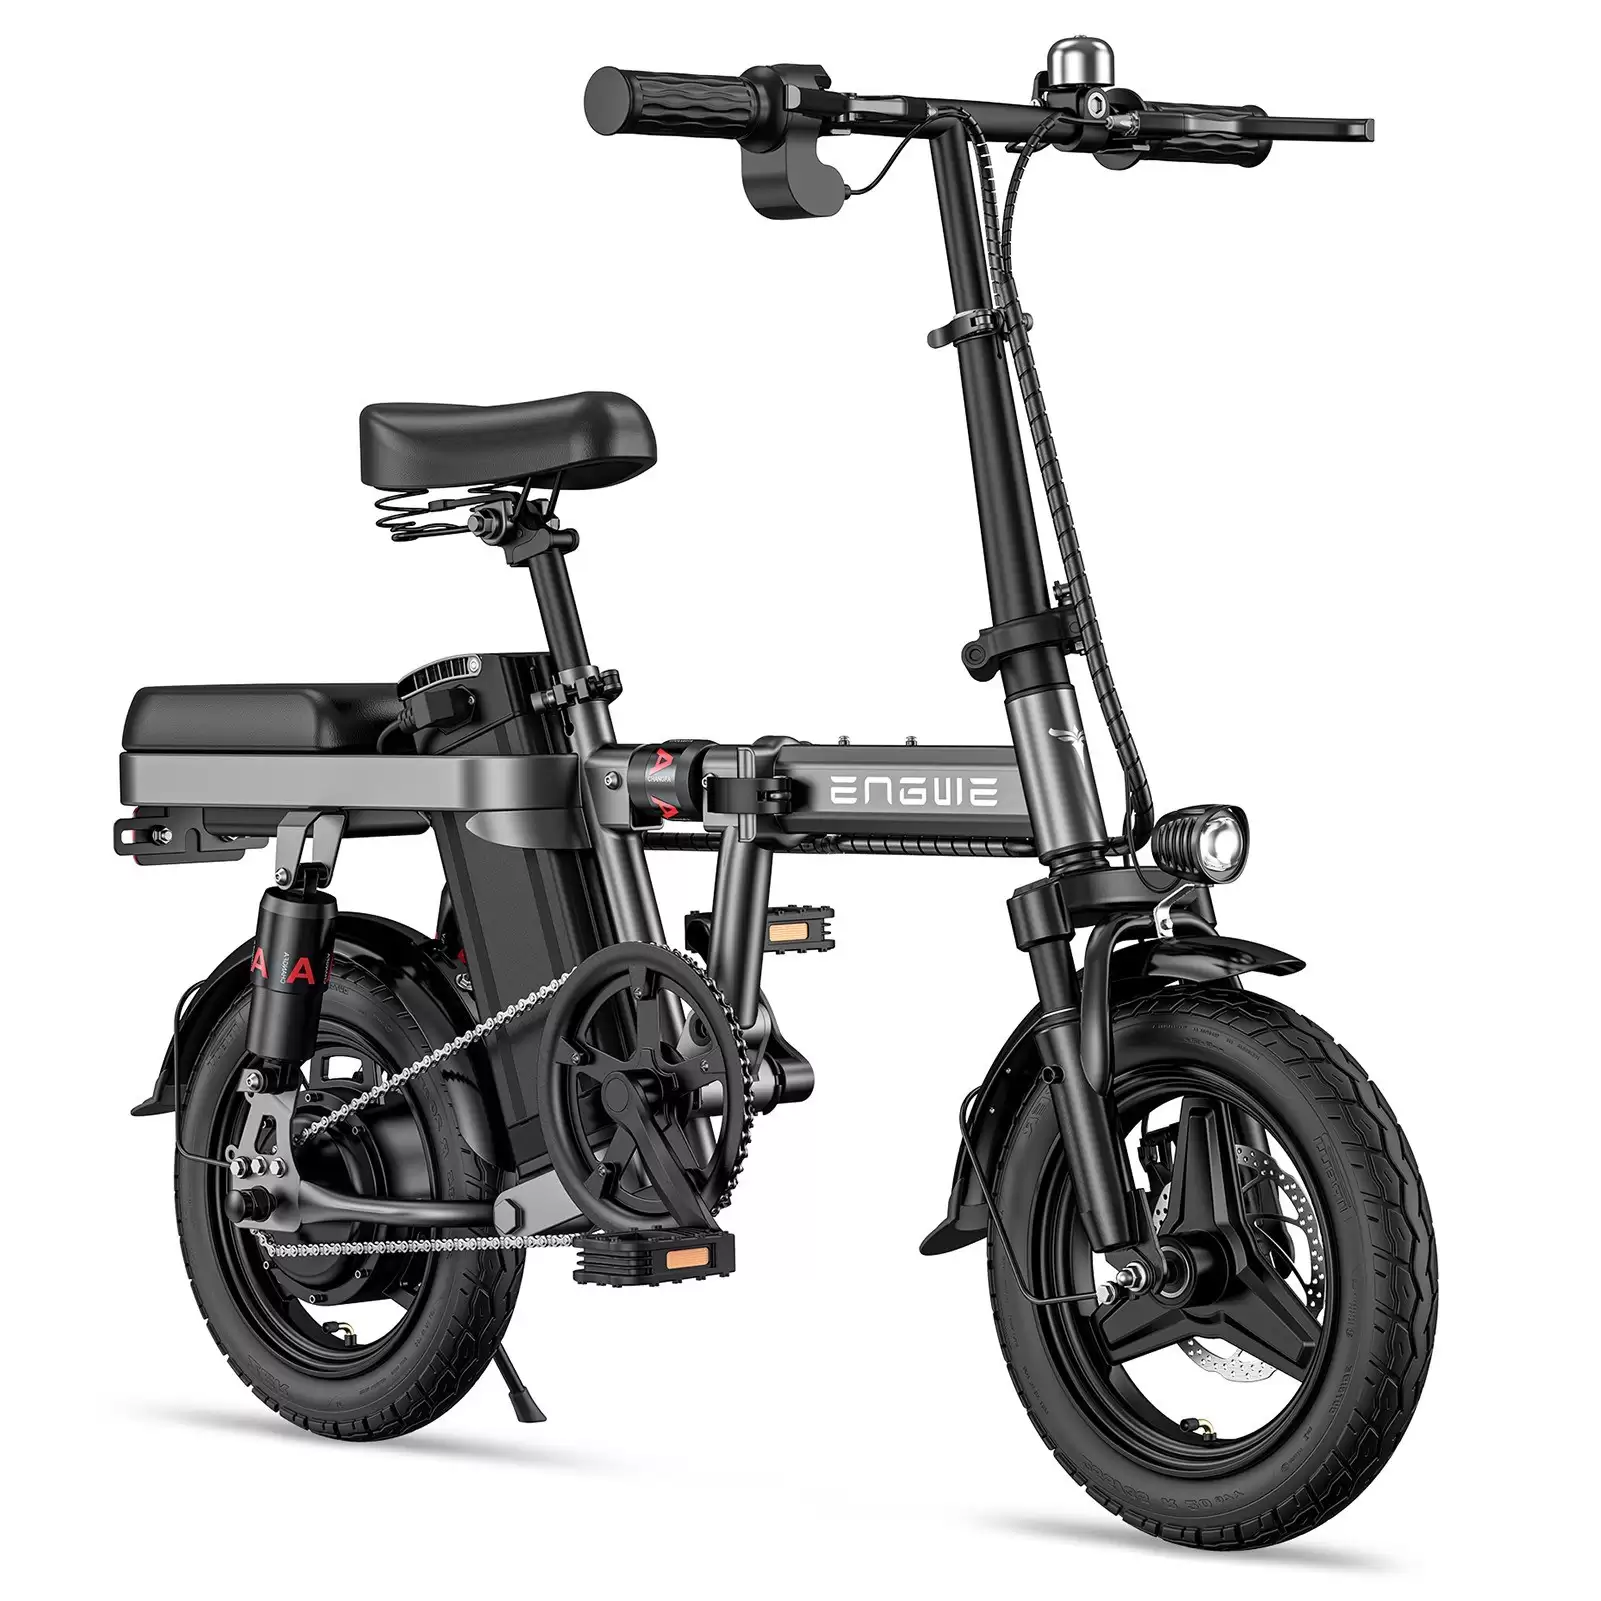 Order In Just $535 Coupon Engwe T14 Ebike 14in 250w Hub Motor Multiple Suspension Folding Electric Bicycle 50-60km Pas Mode Range With This Discount Coupon At Tomtop